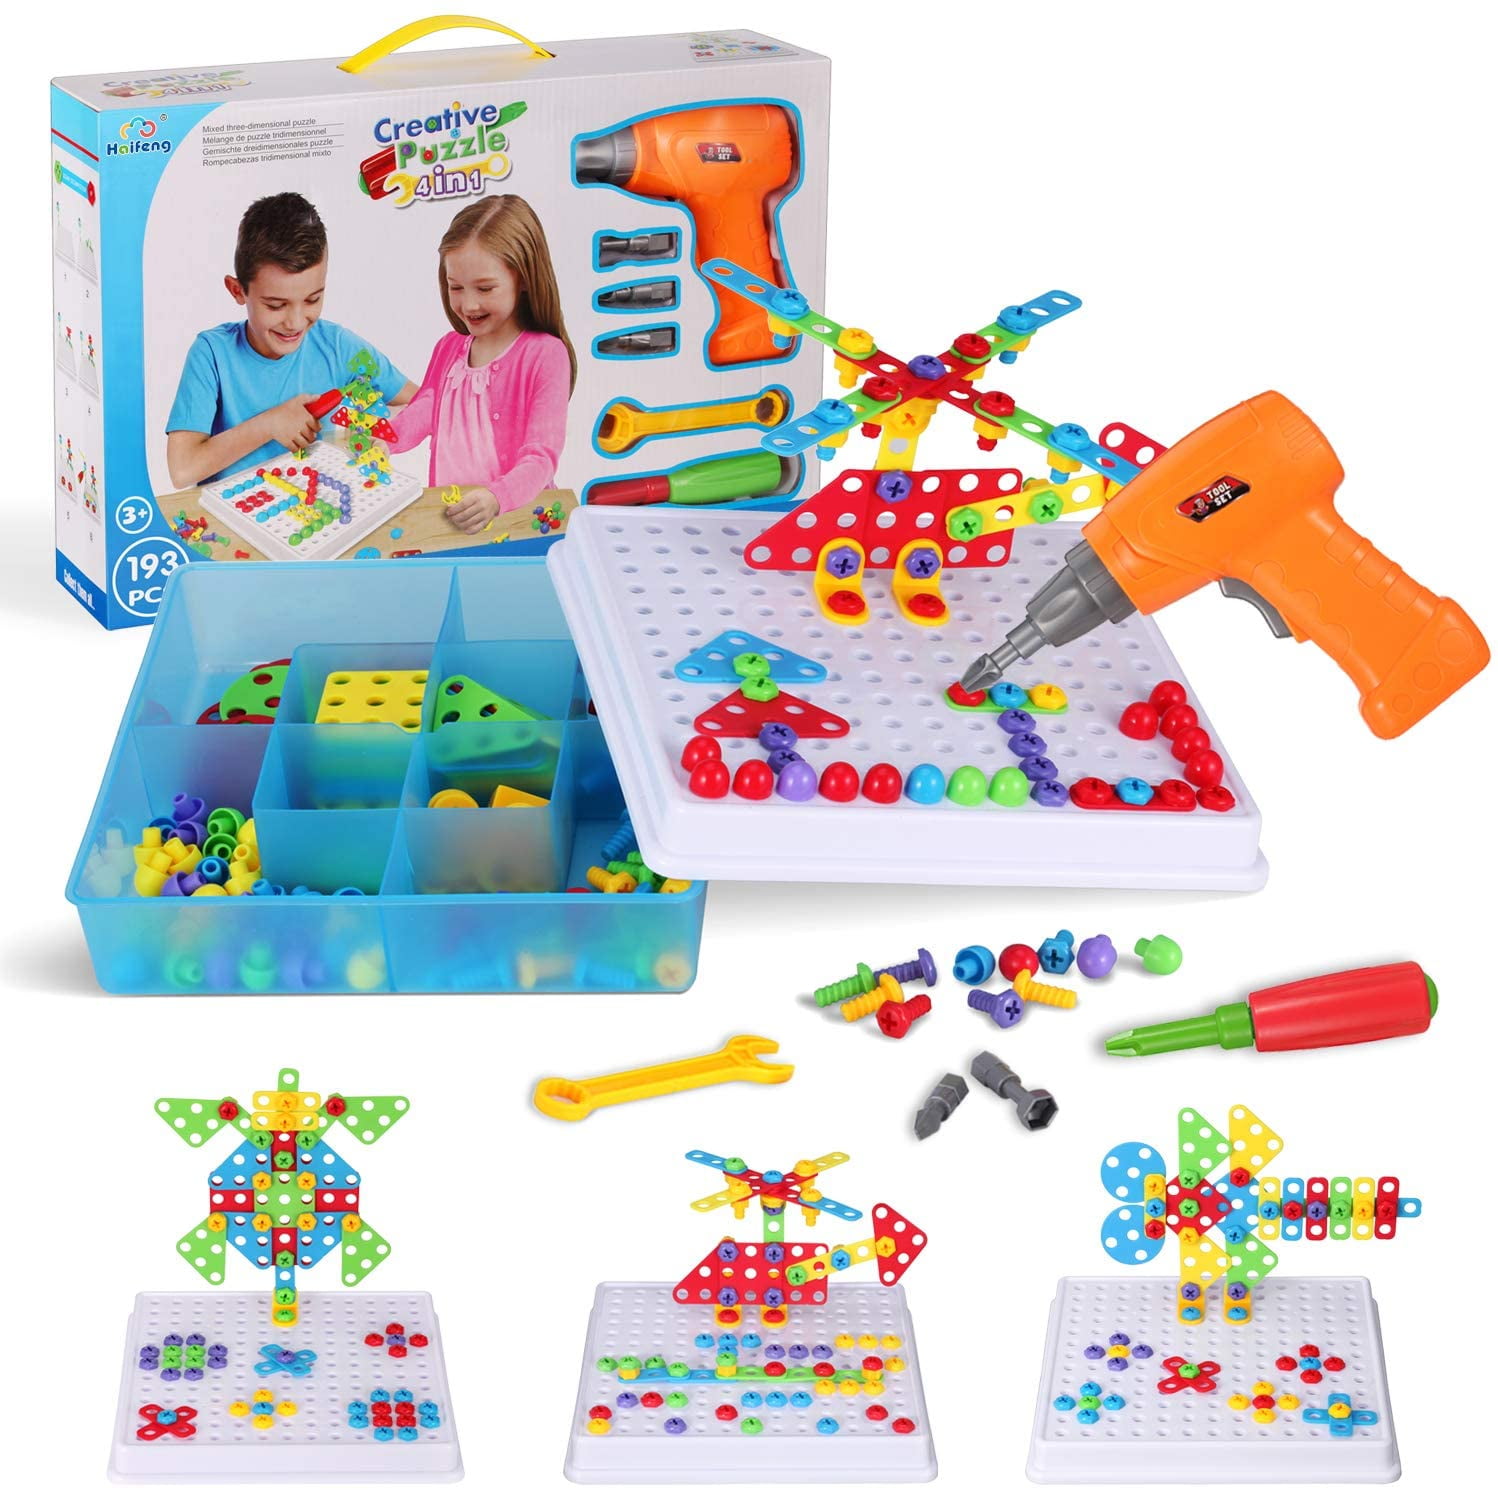 Kids Toys Creative Learning Educational Toys Kids Age 3-8 Years Old Boys Girls 